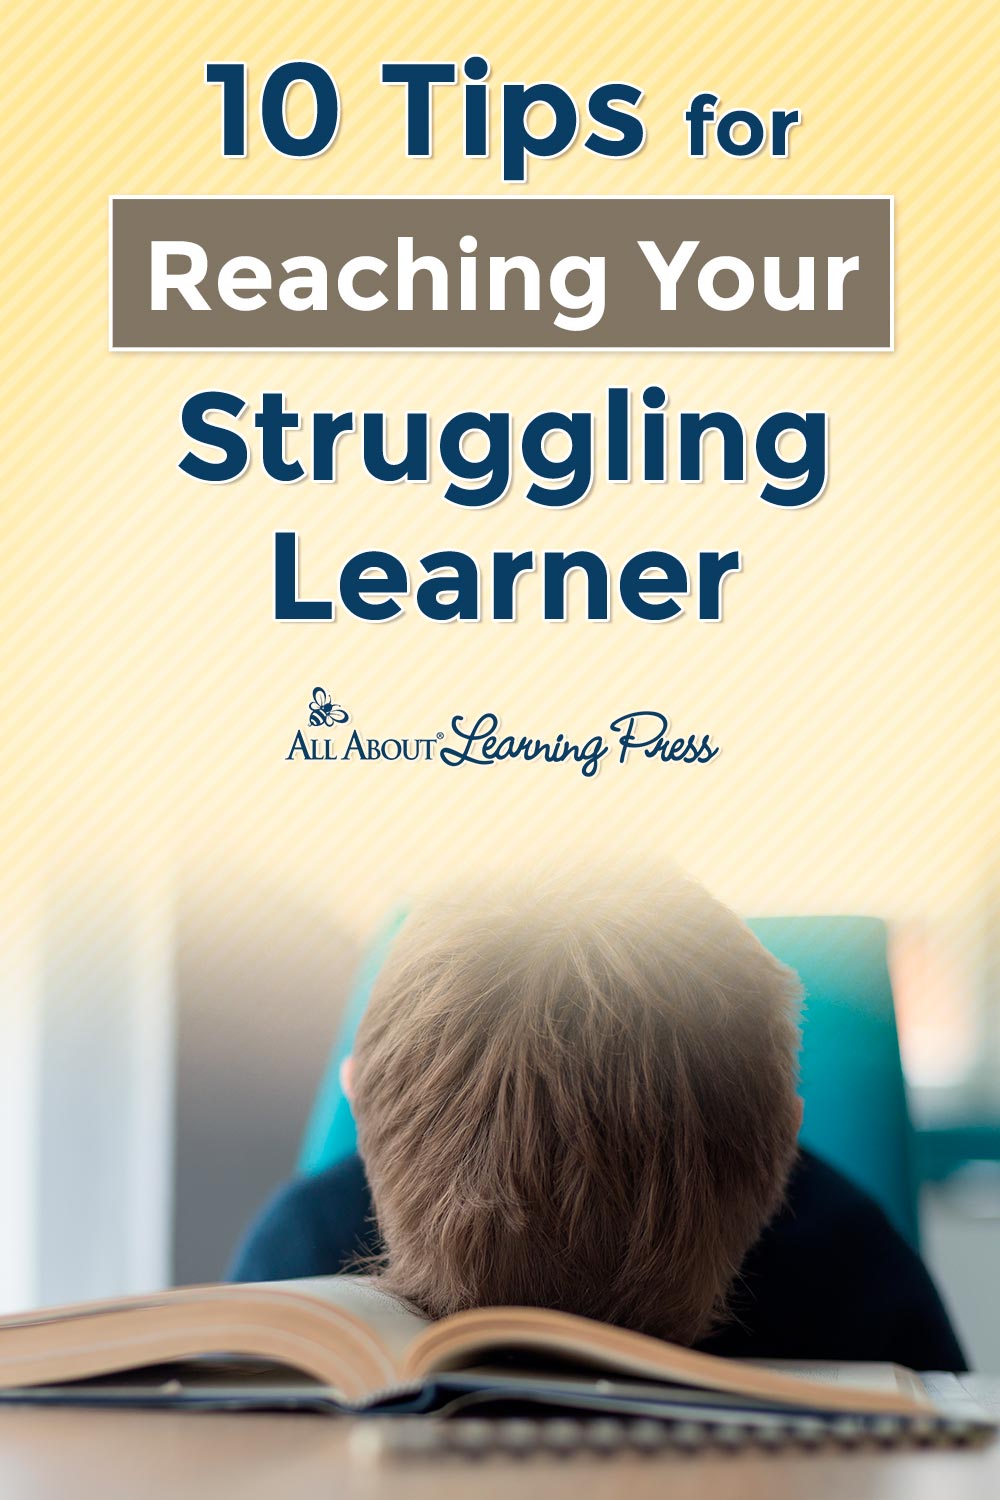 10 Tips For Reaching Your Struggling Learner